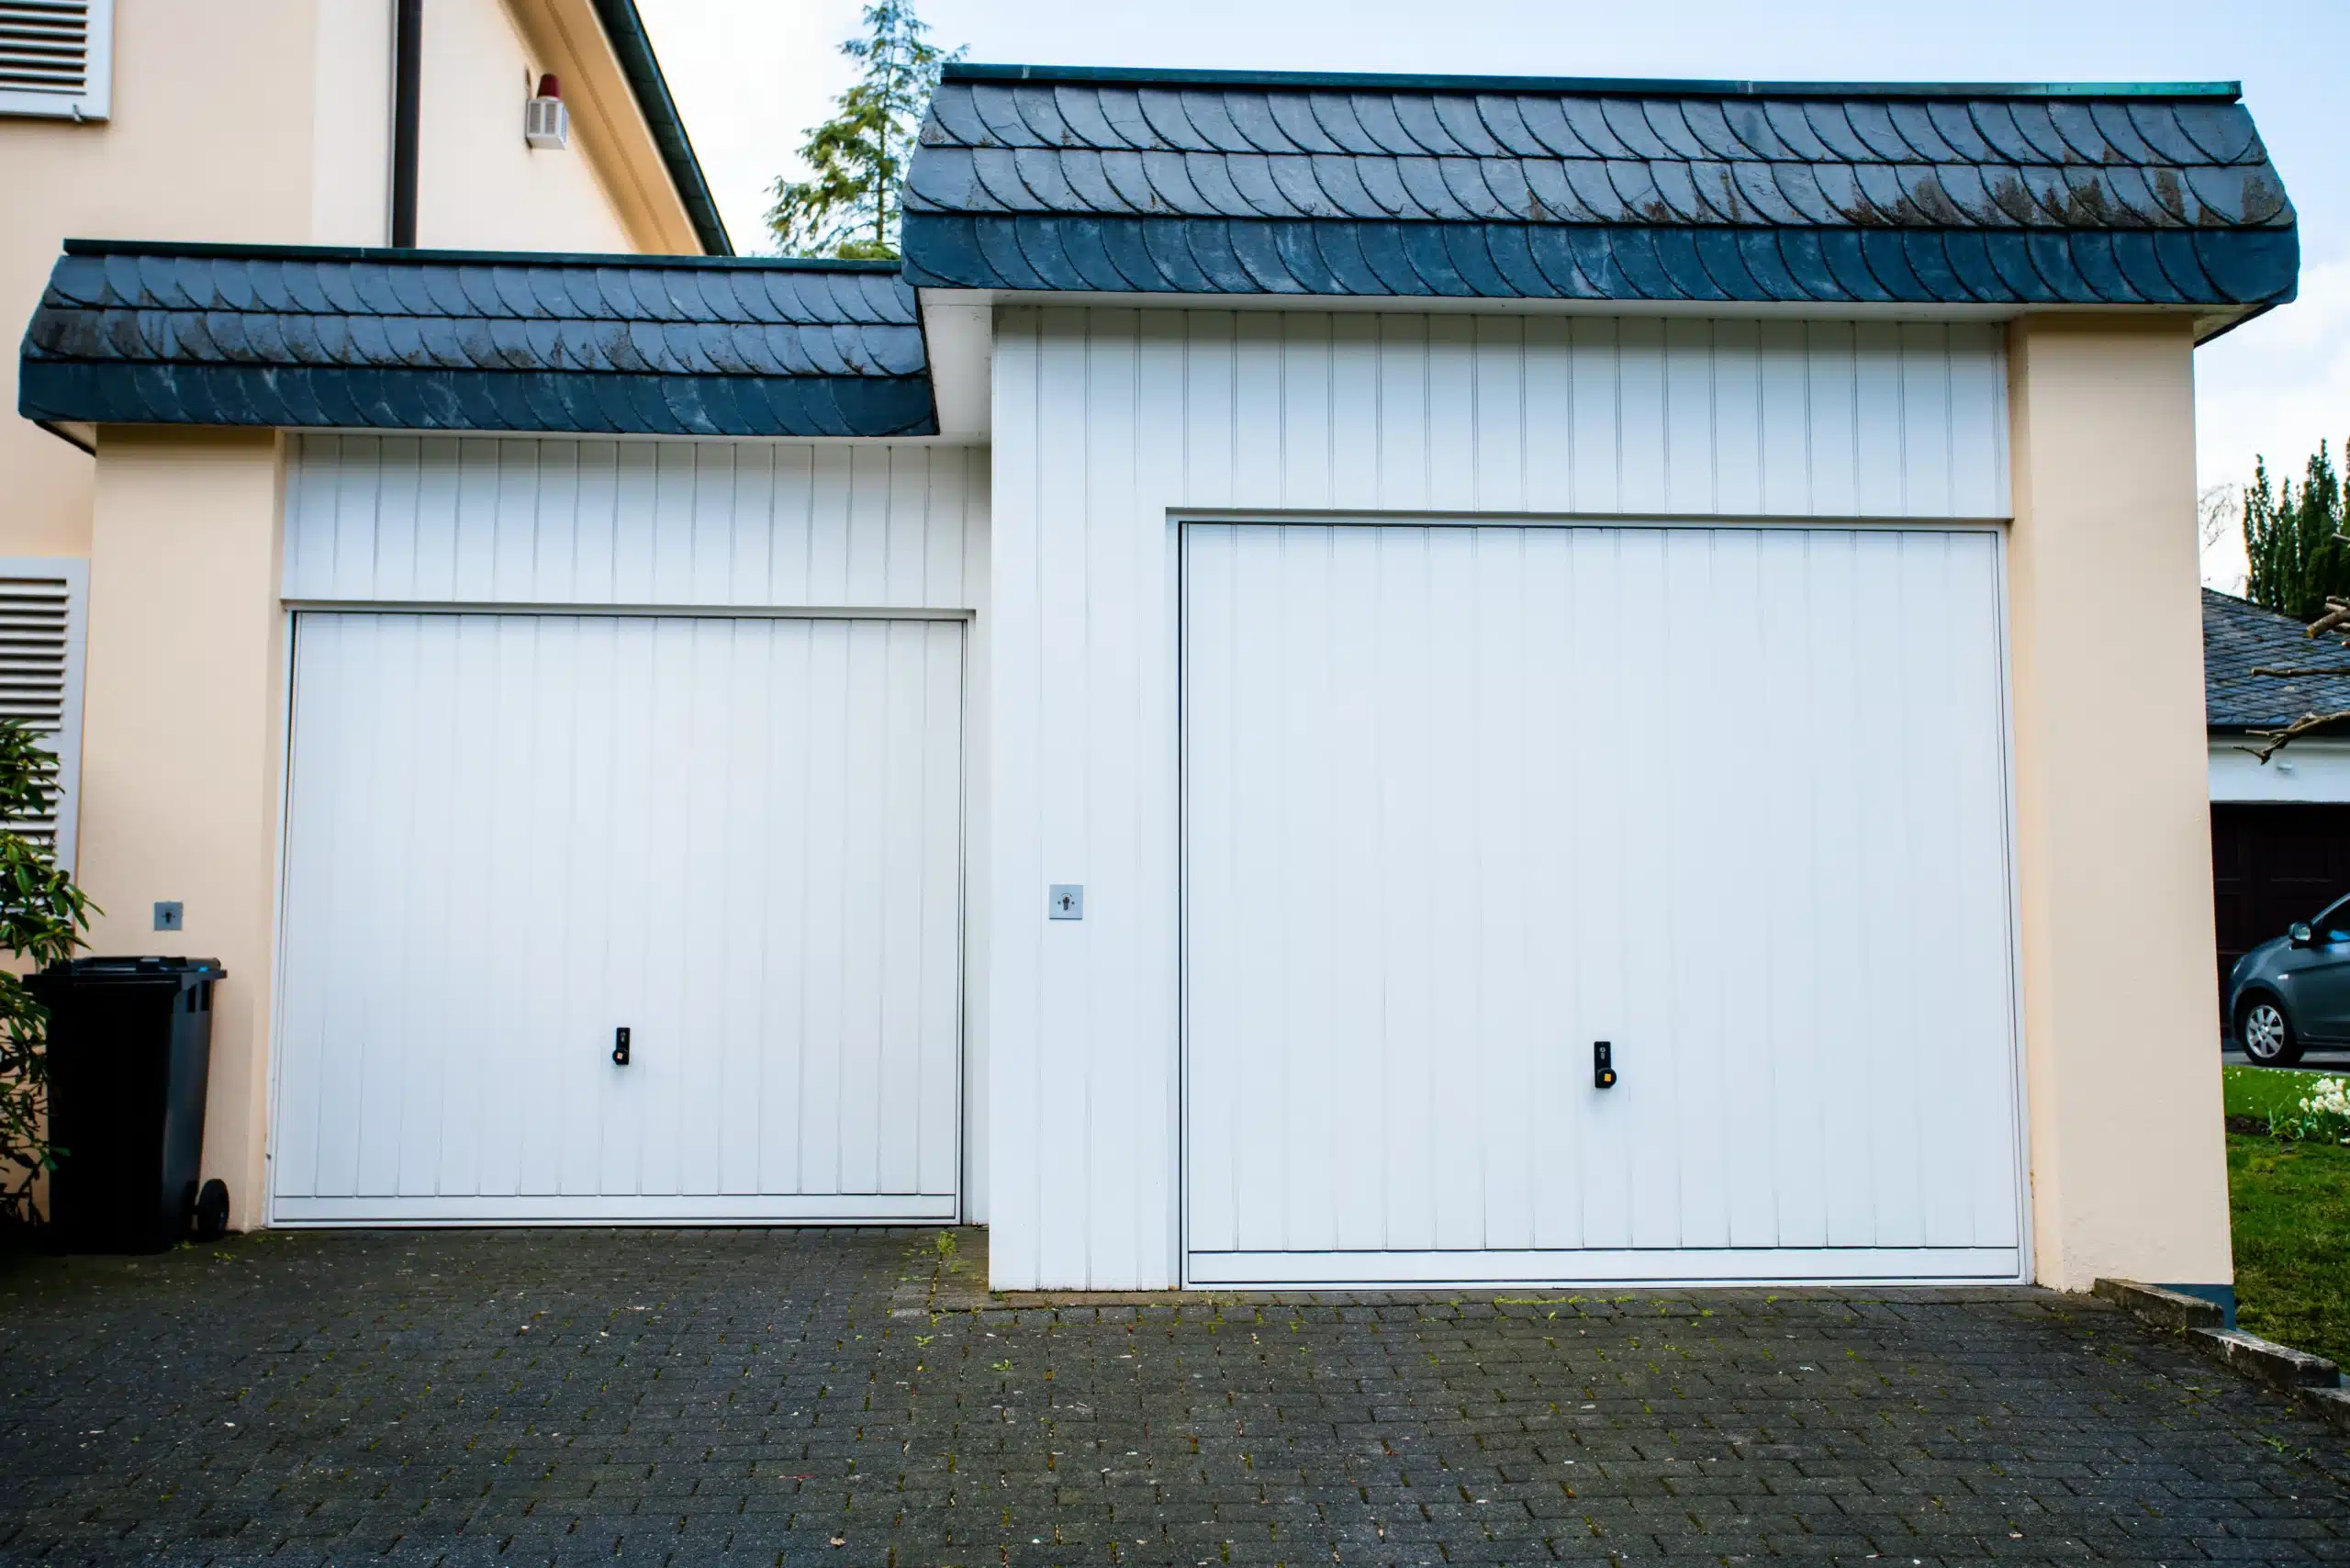 Are Garage Doors Covered By Homeowners Insurance in Louisiana?